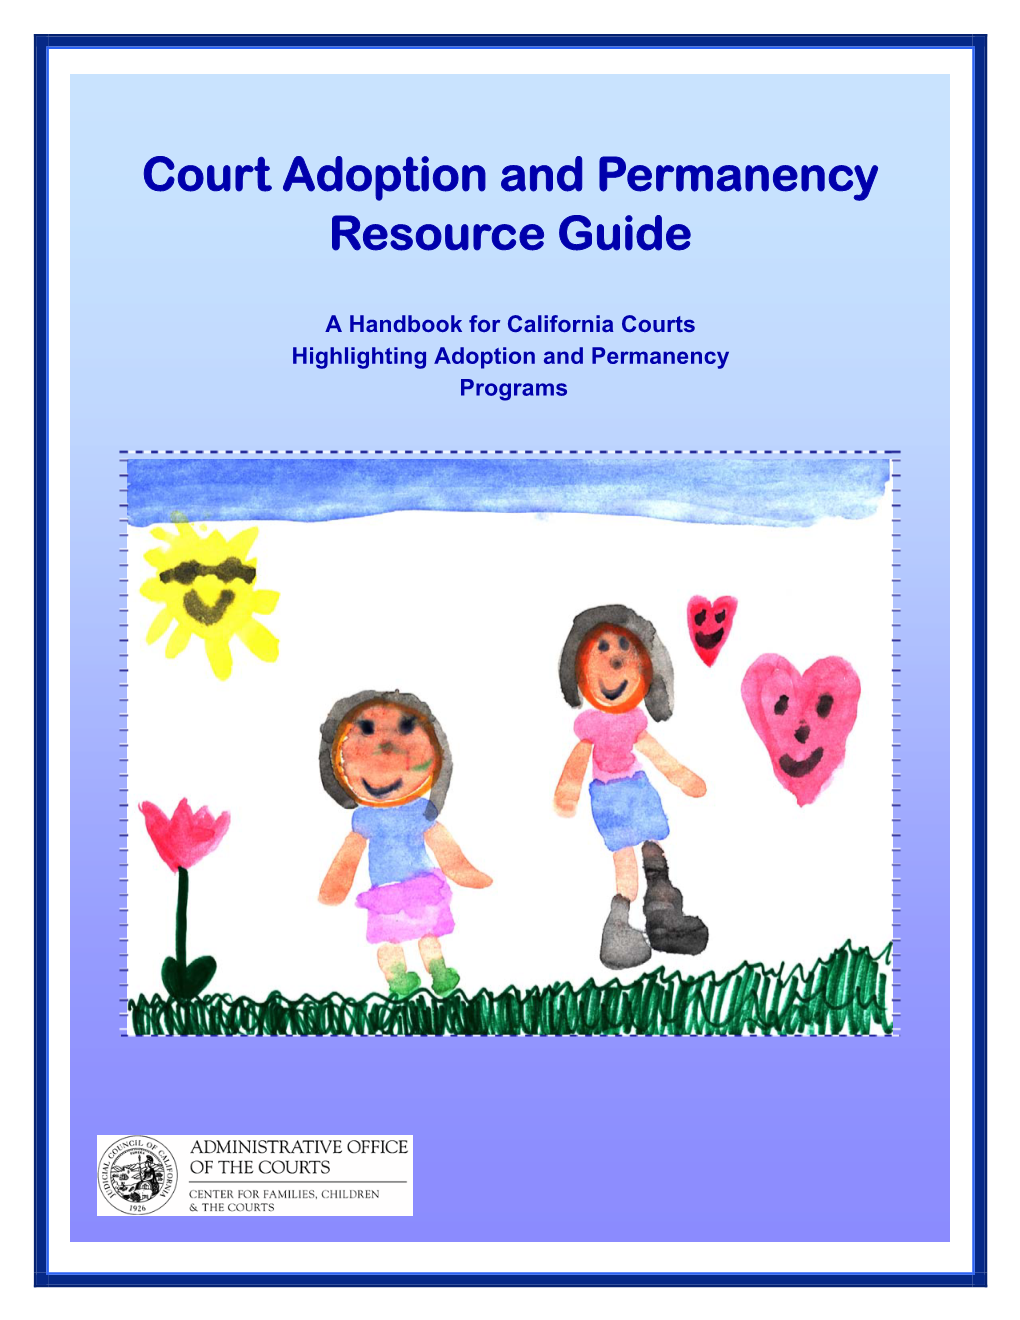 Court Adoption and Permanency Resource Guide